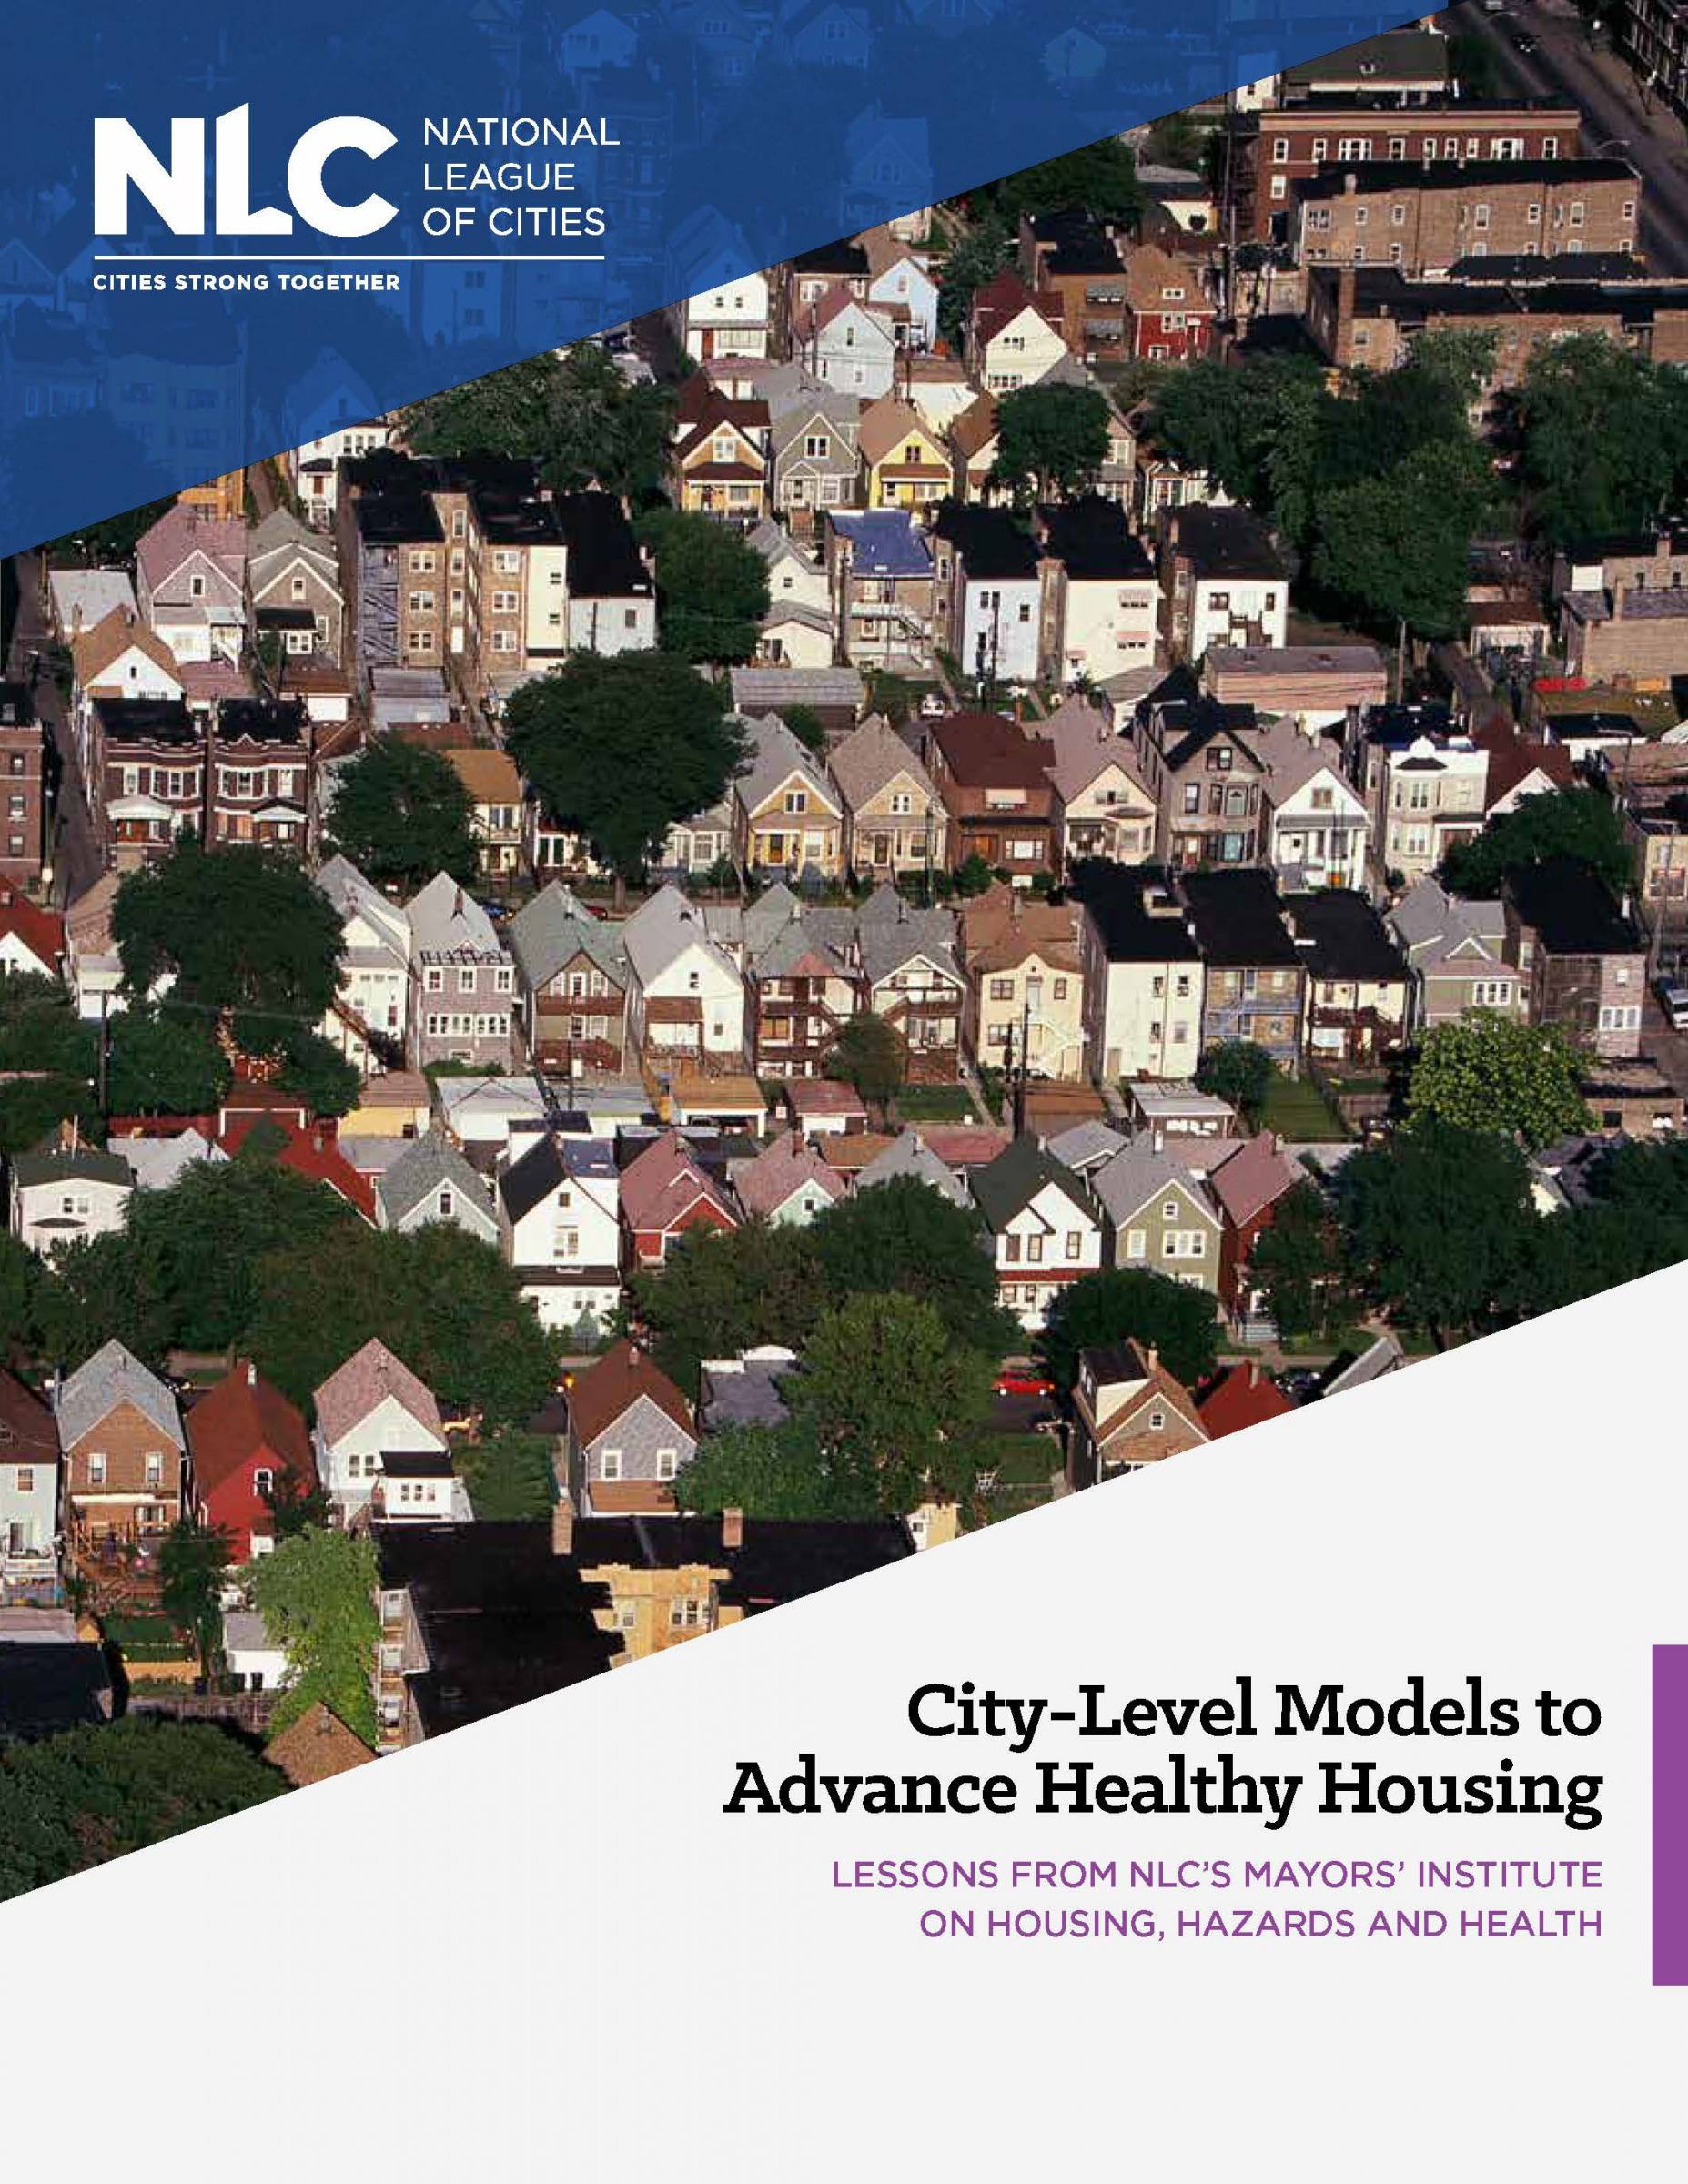 City-Level Models to Advance Healthy Housing